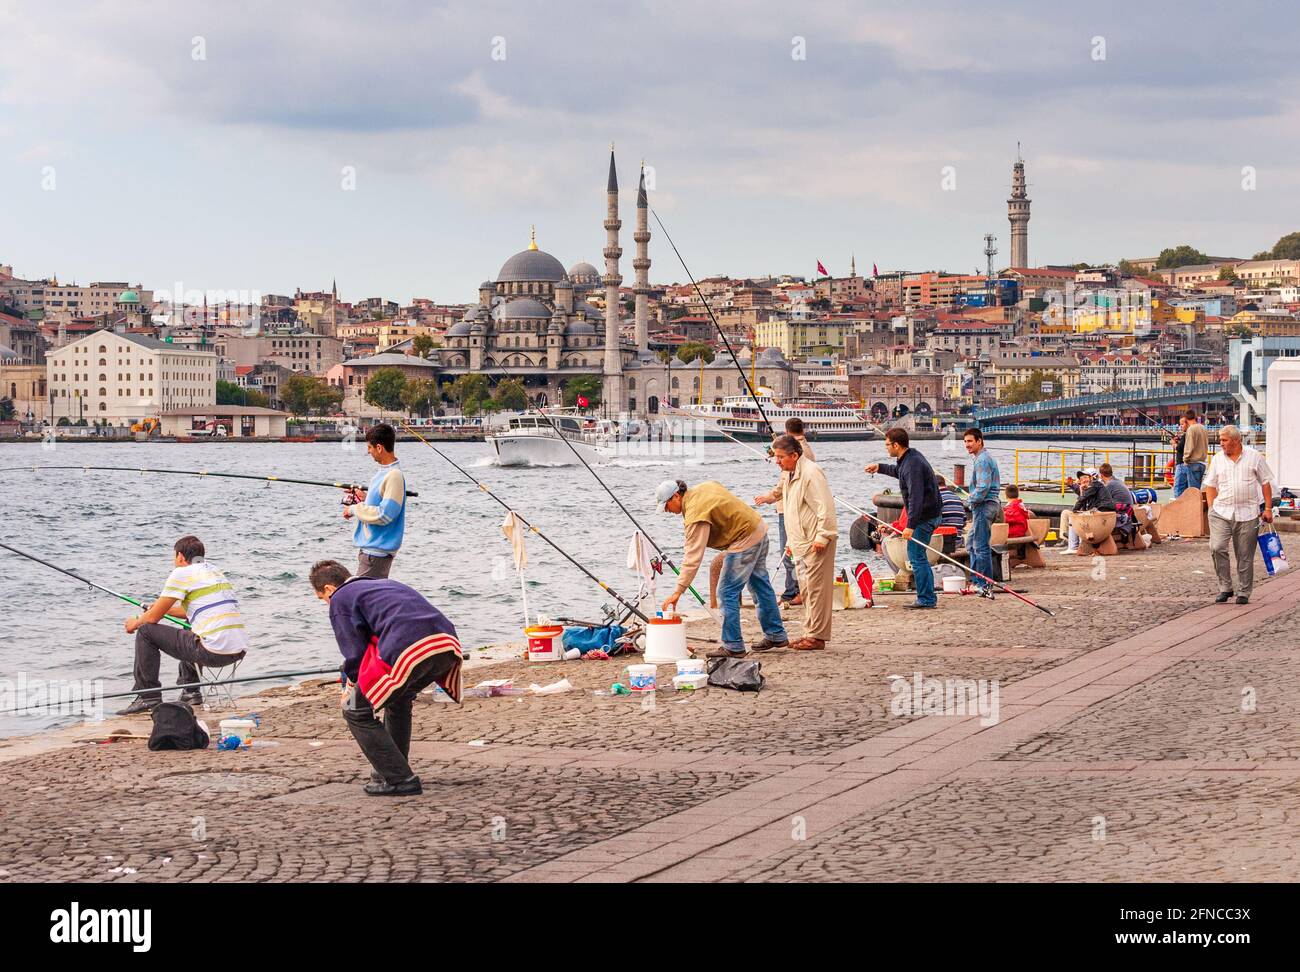 Fishing on the waterfront in Istanbul Turkey Stock Photo